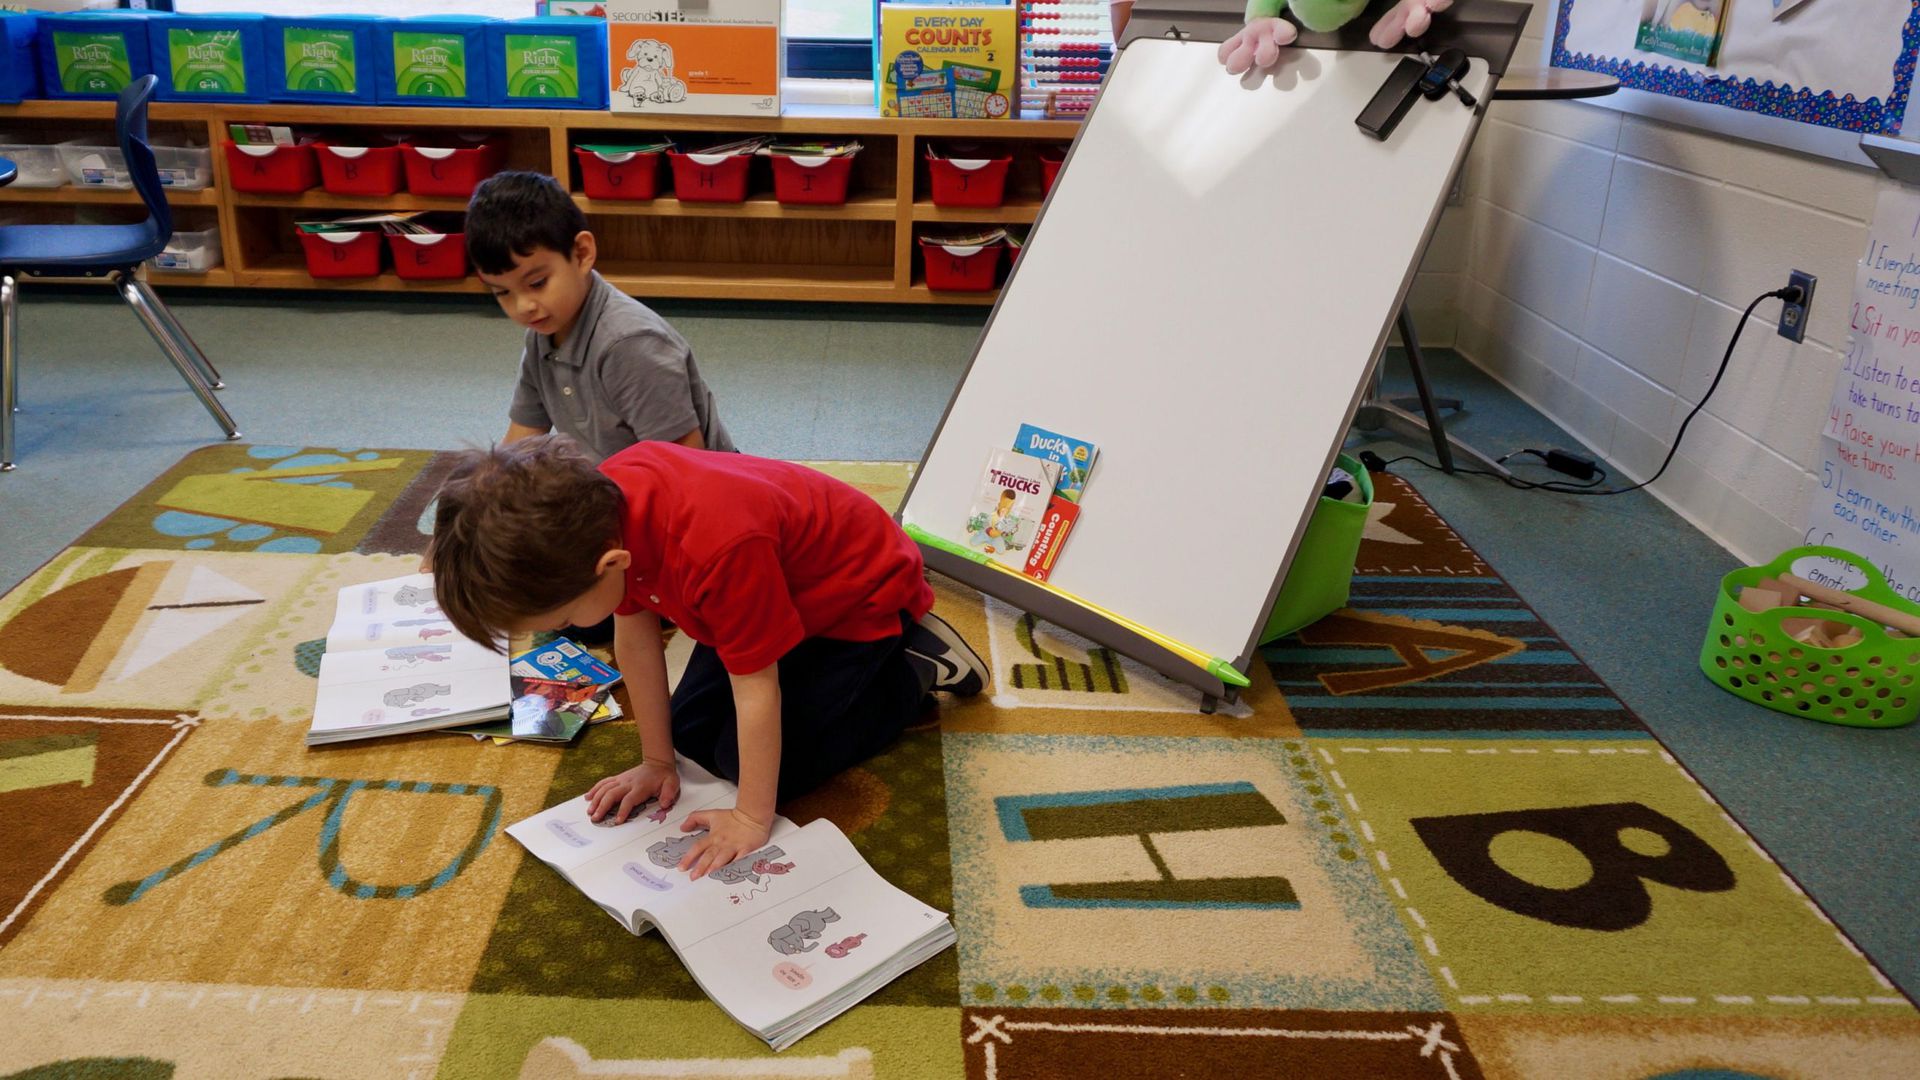 Two children read picture books in a classroom.